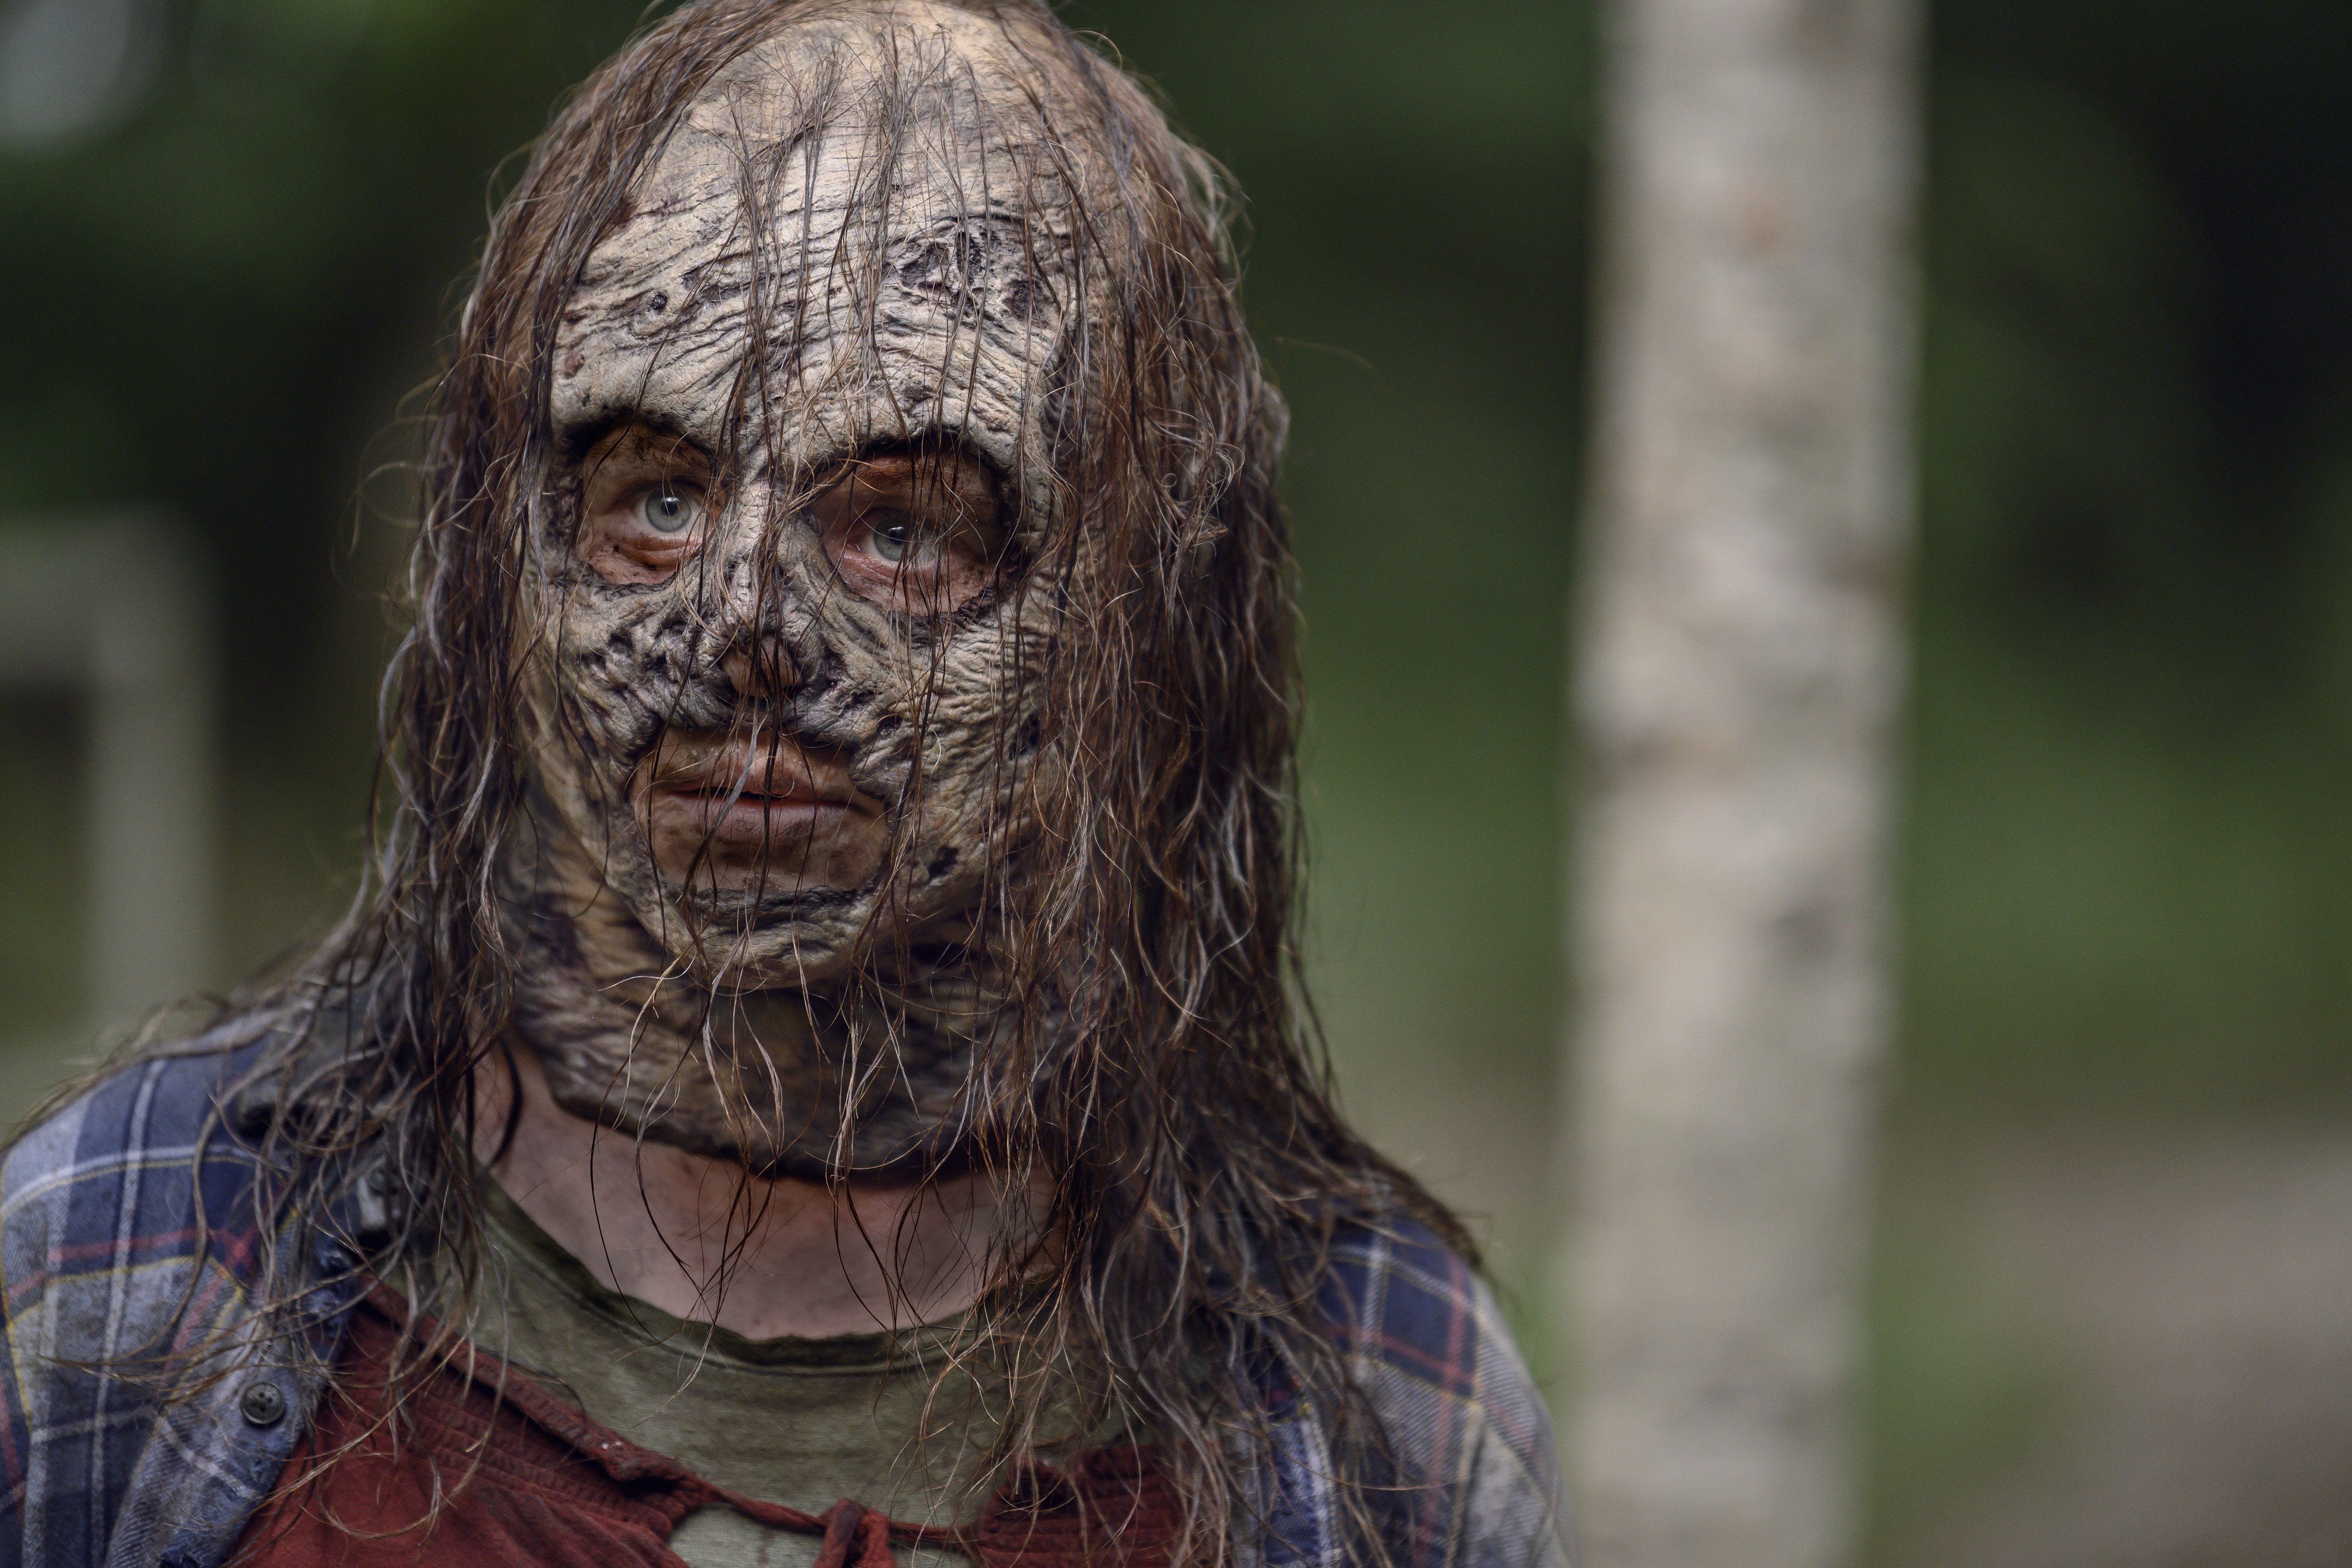 walking dead just introduced the whisperer